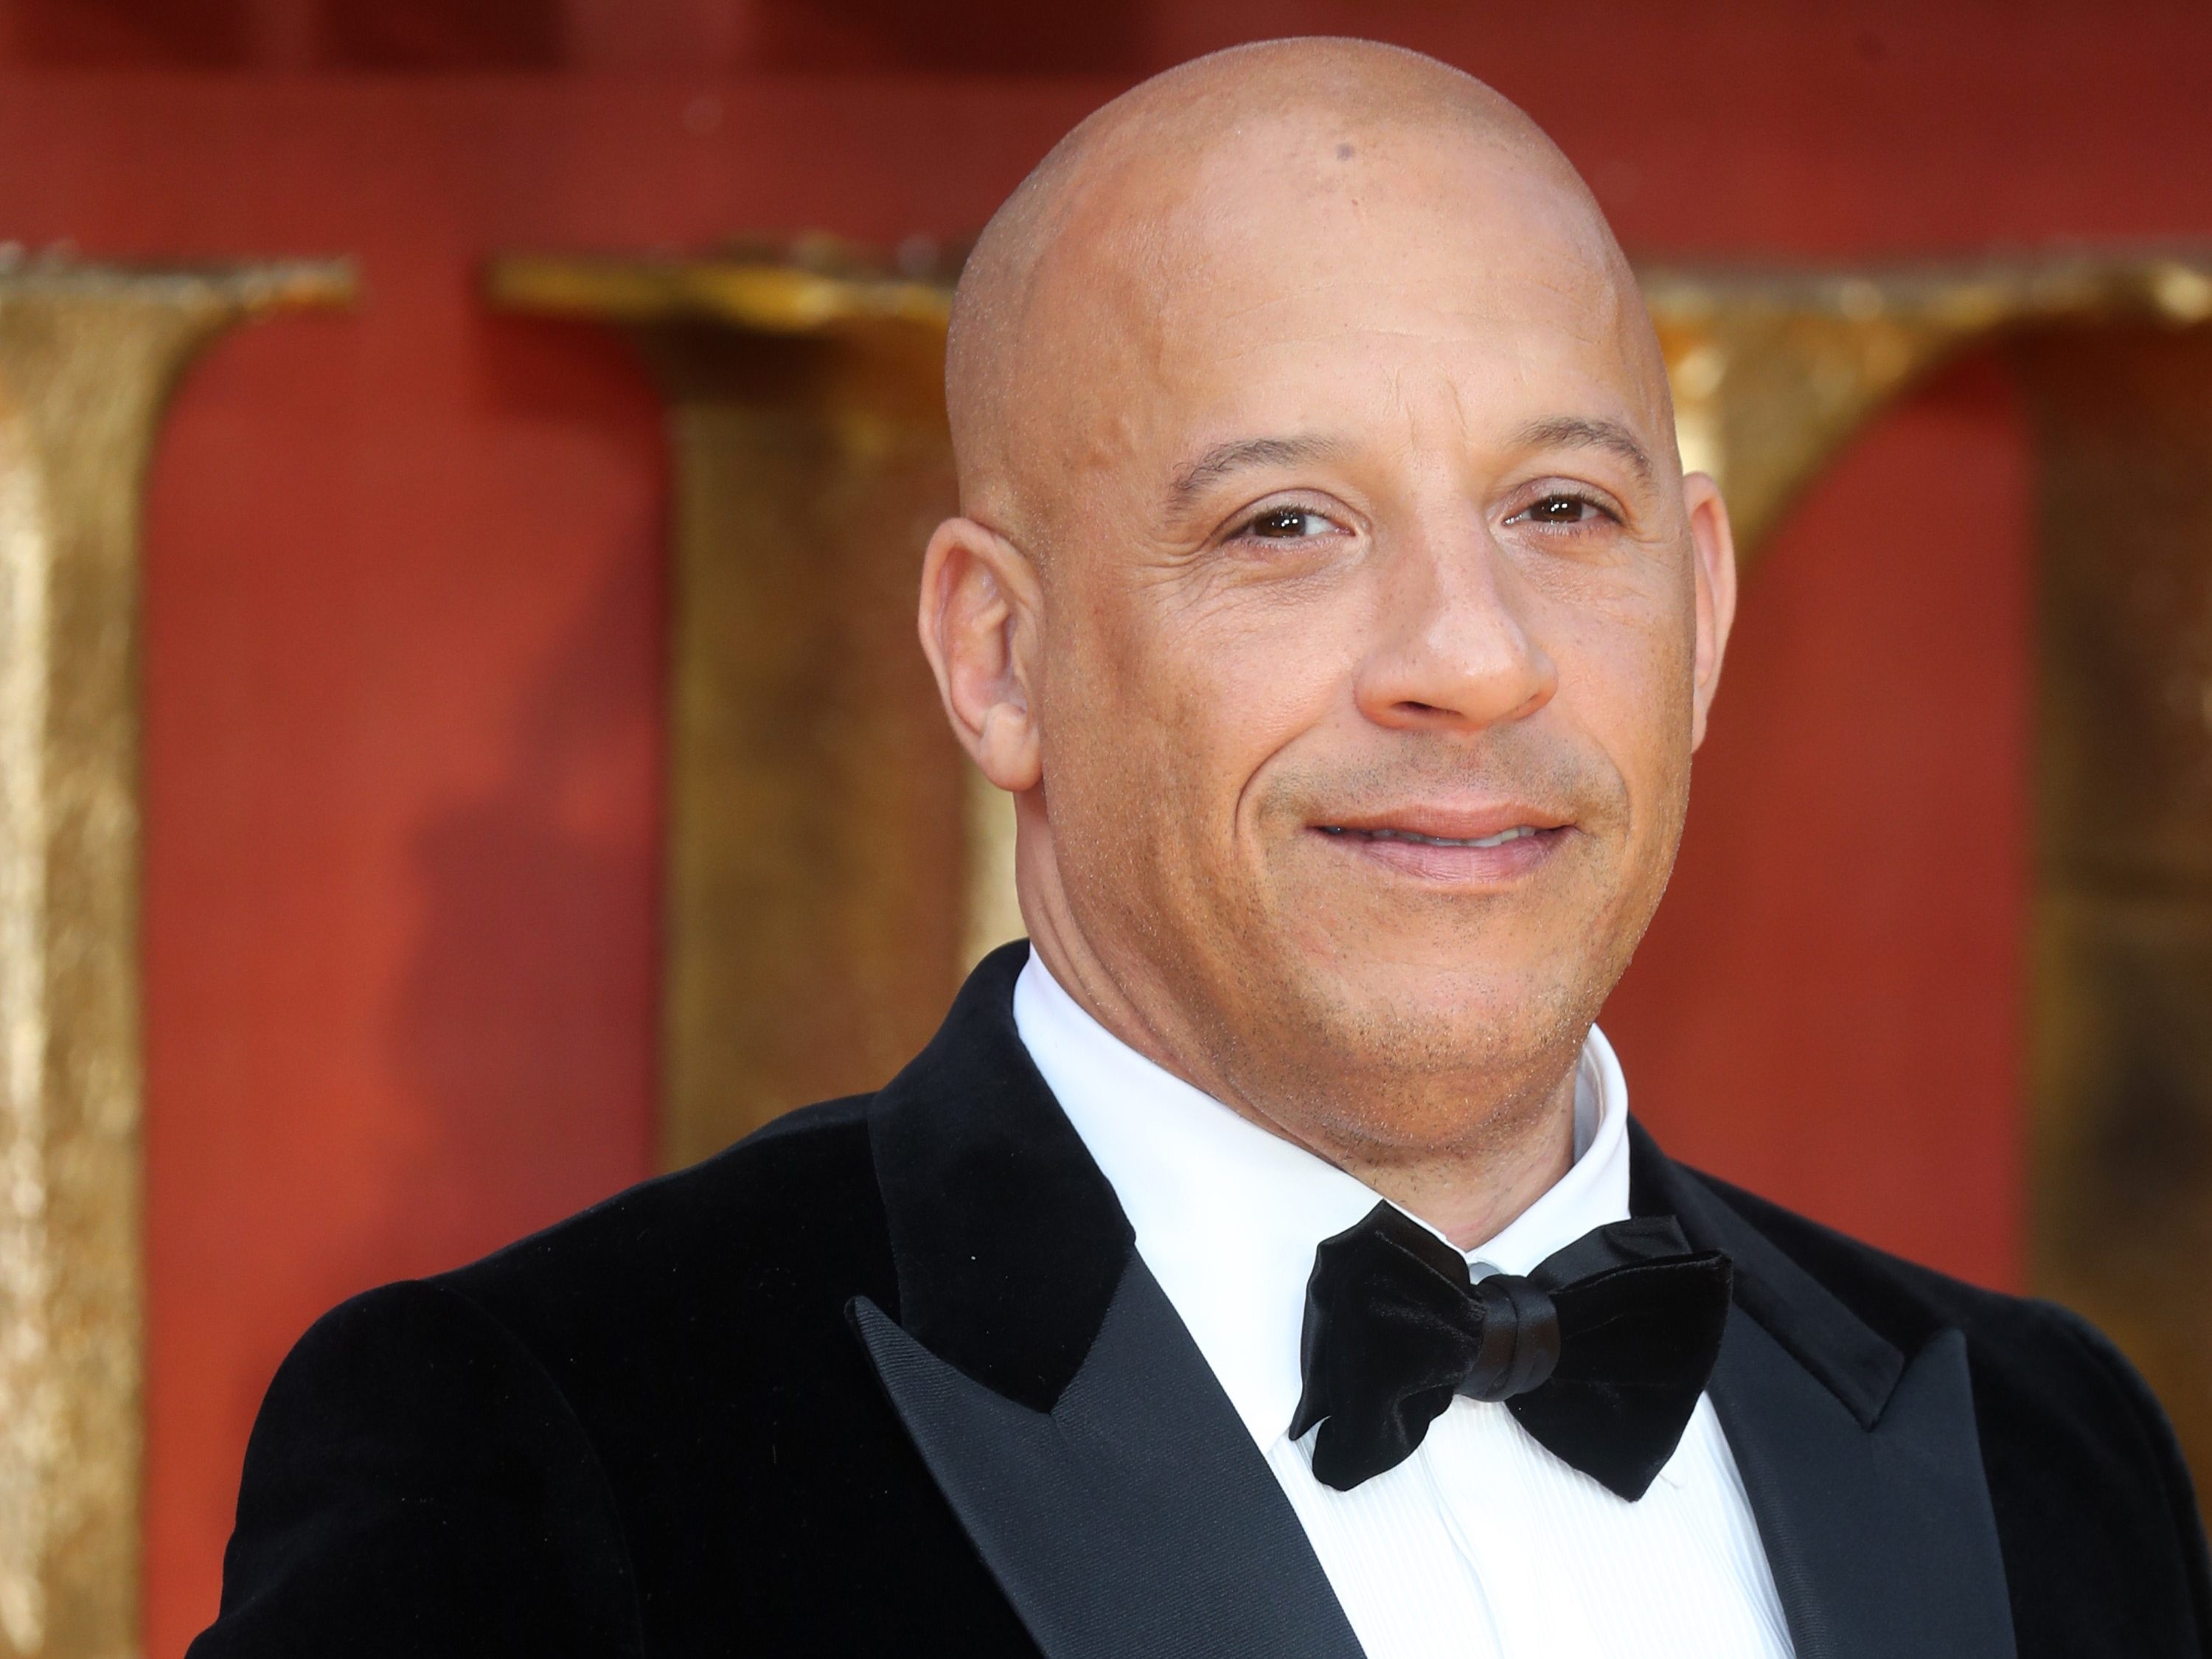 Vin Diesel reportedly saw 'Fast and Furious 9' stuntman fall | Toronto Sun